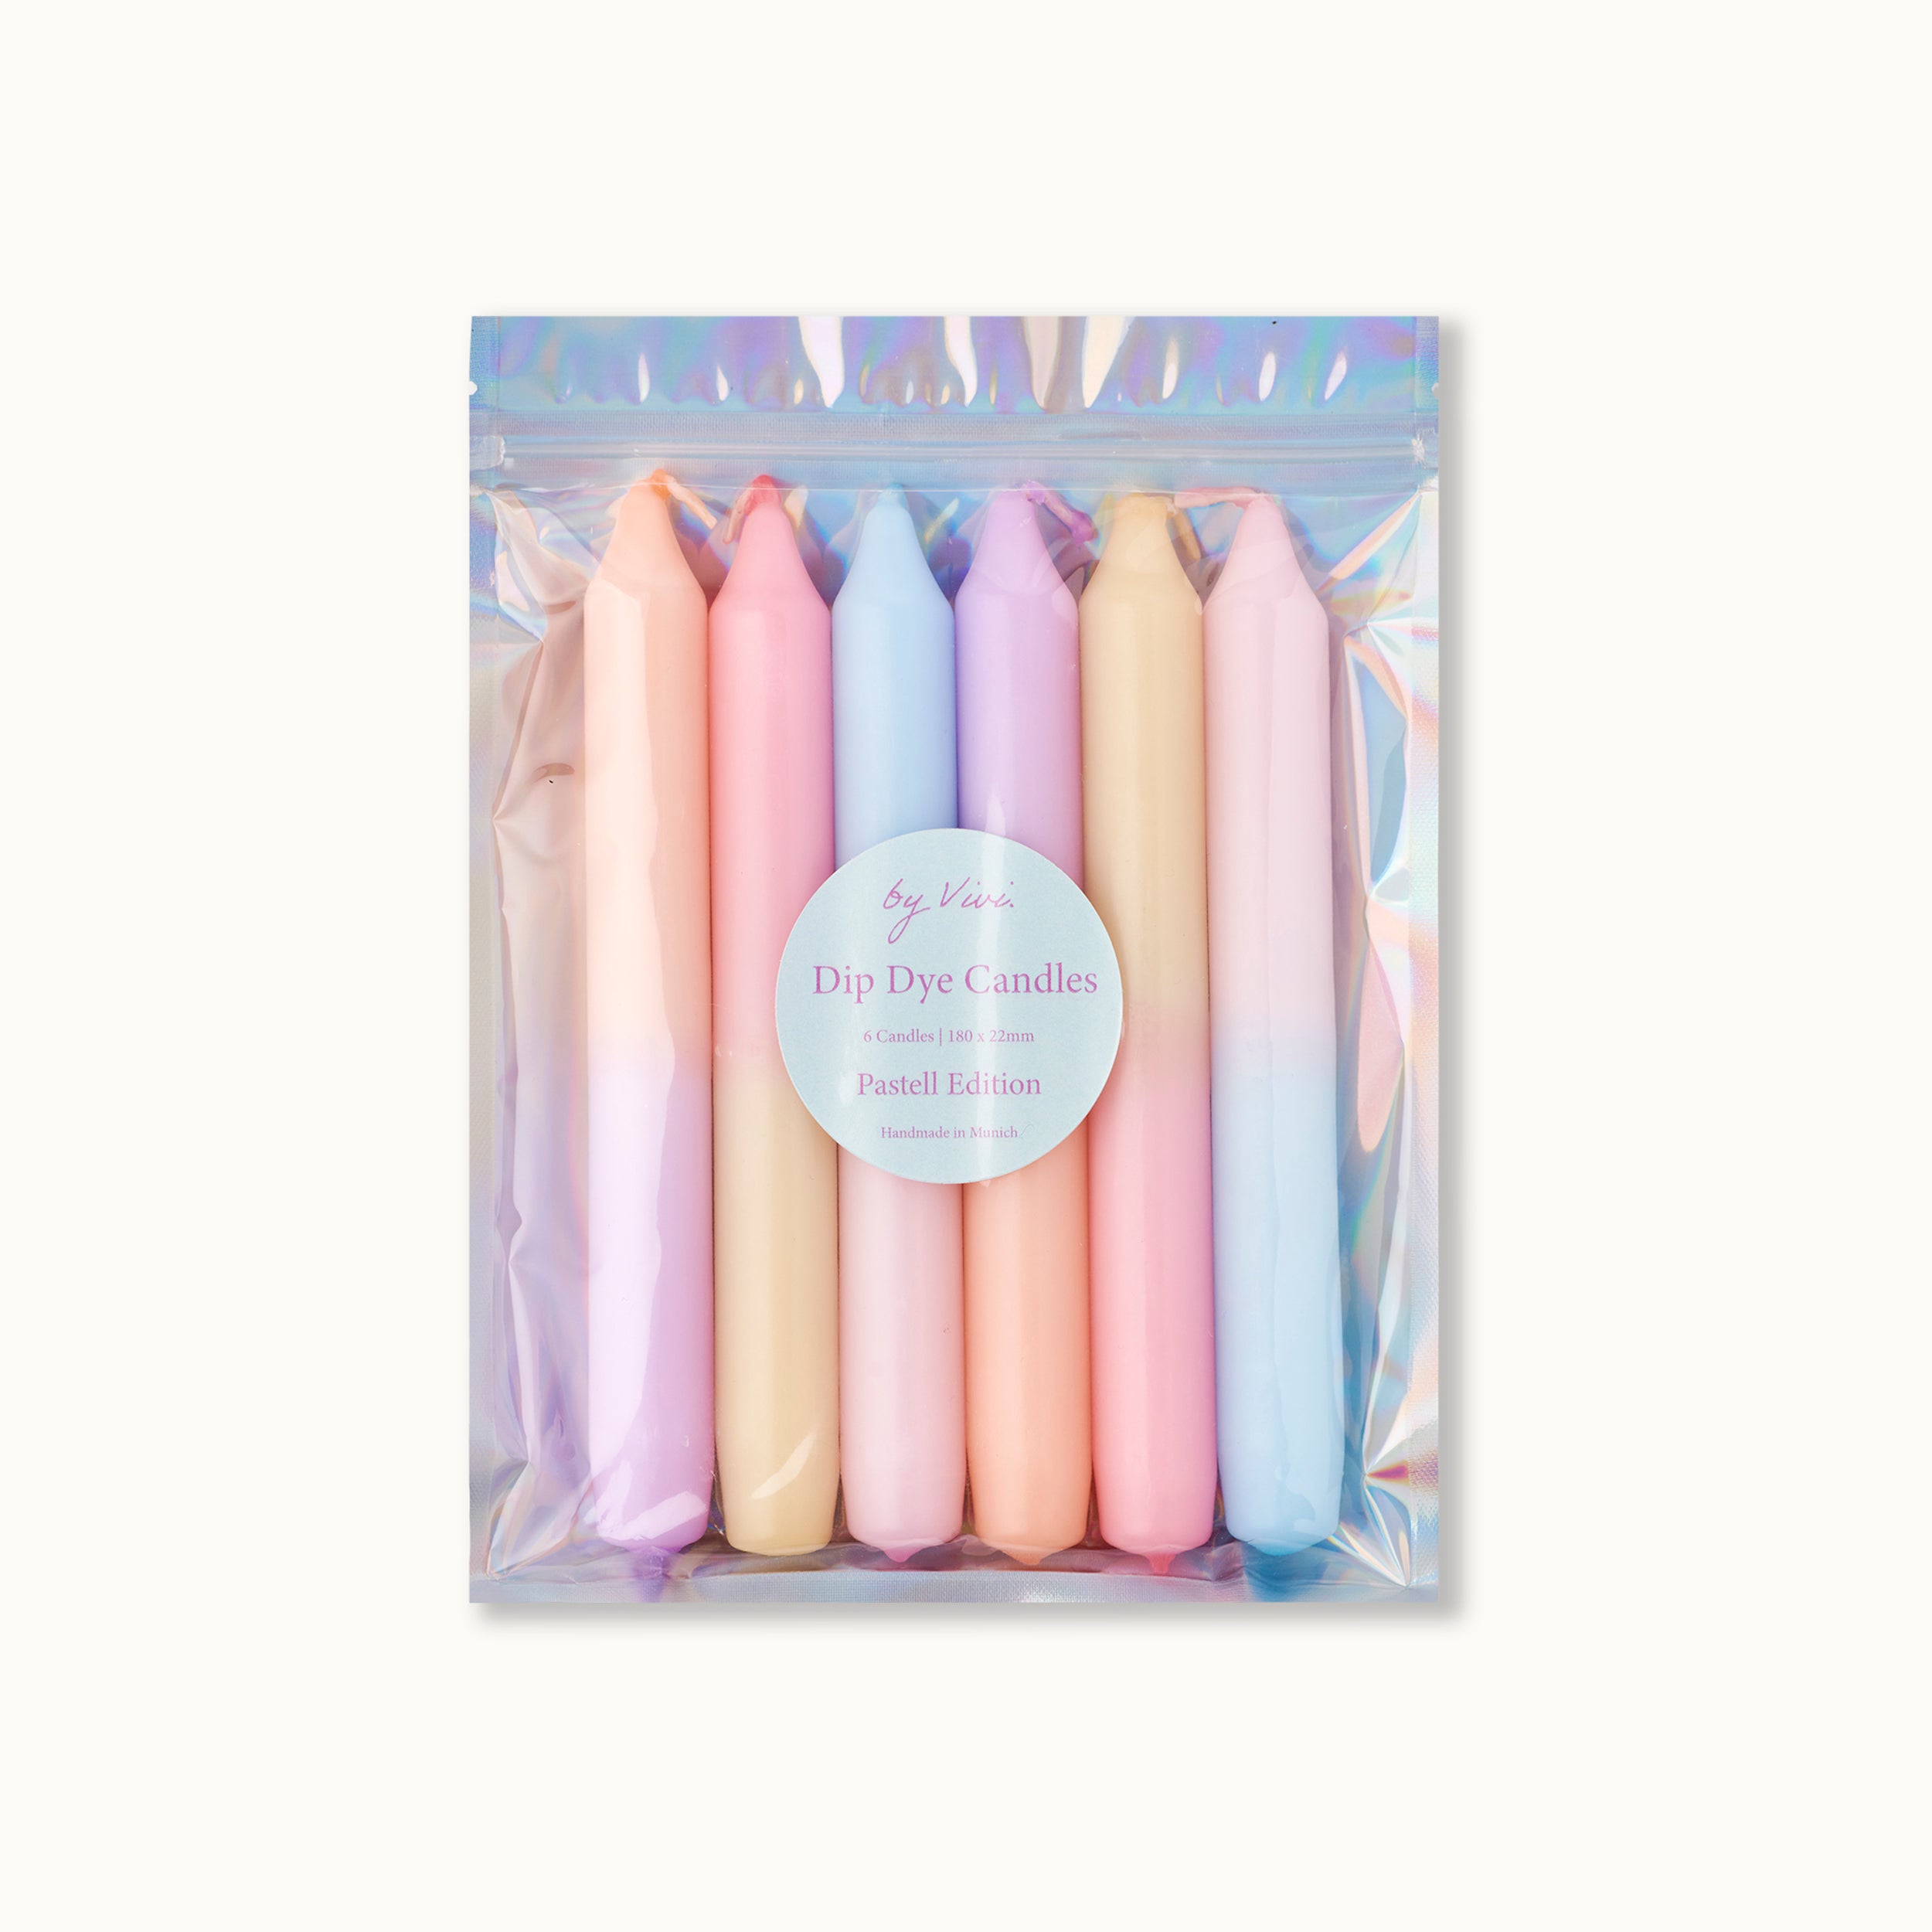 Dip Dye Candle Set: Pastell Edition